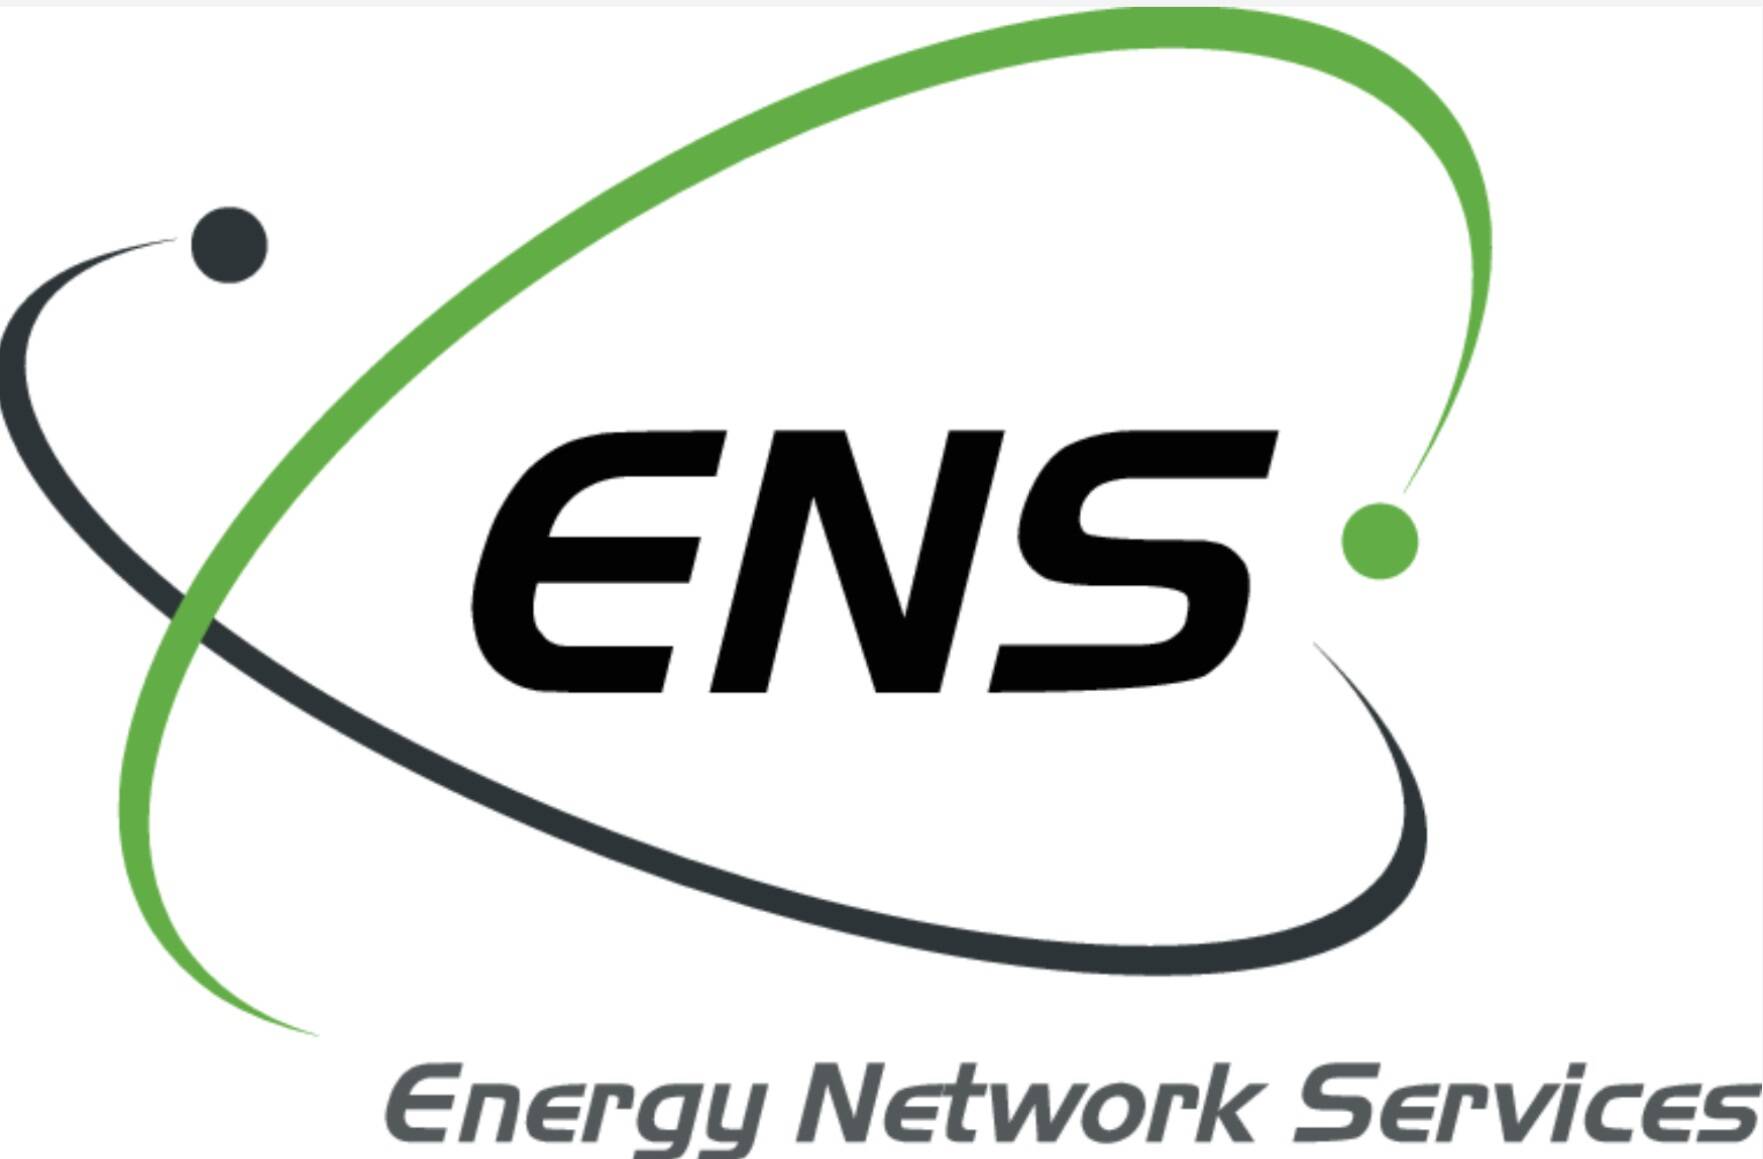 Energy Network Services